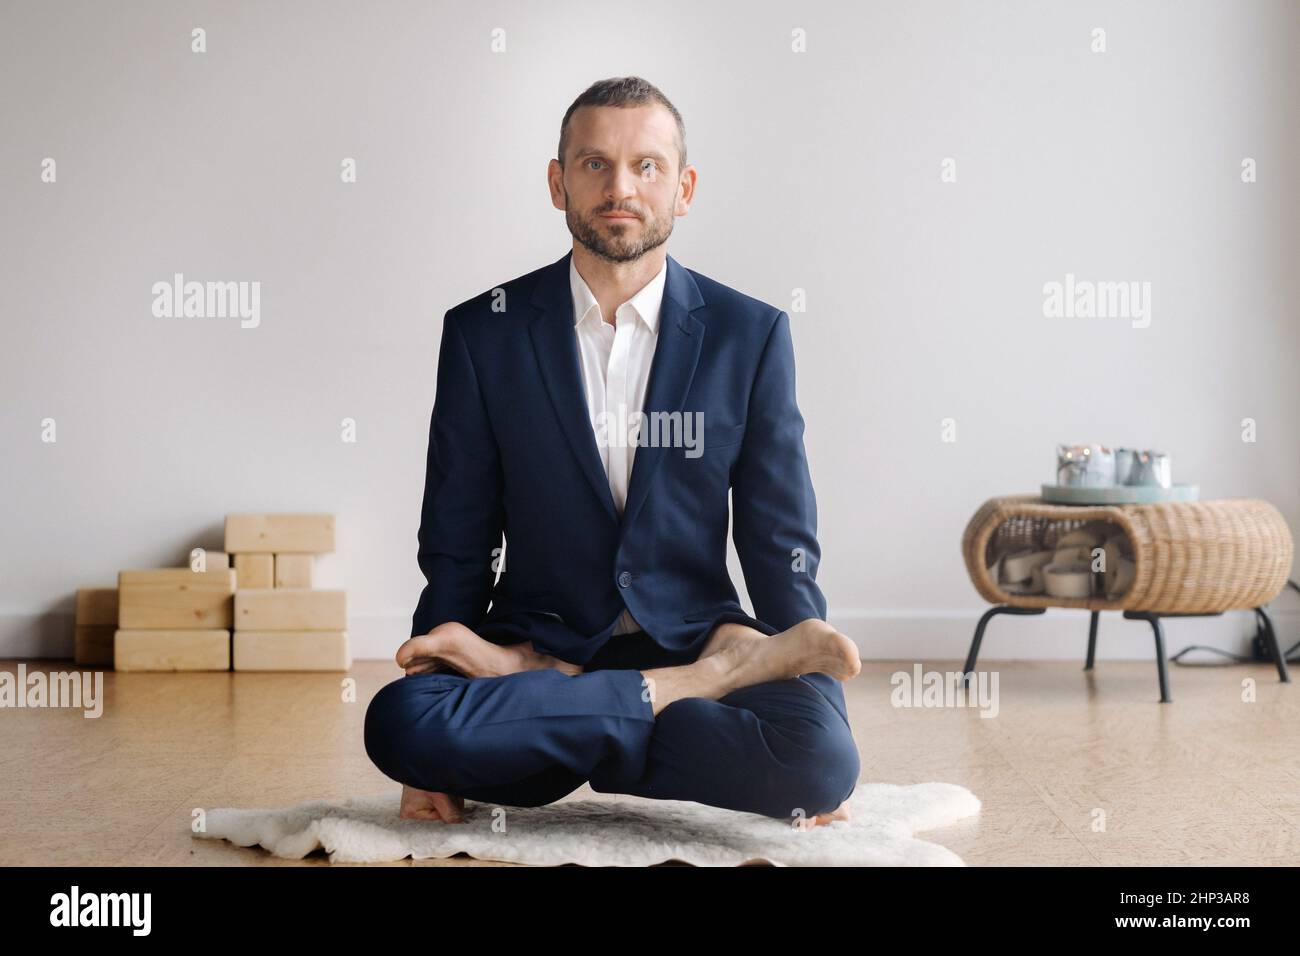 A man in a strict suit does Yoga while sitting in a fitness room Stock Photo